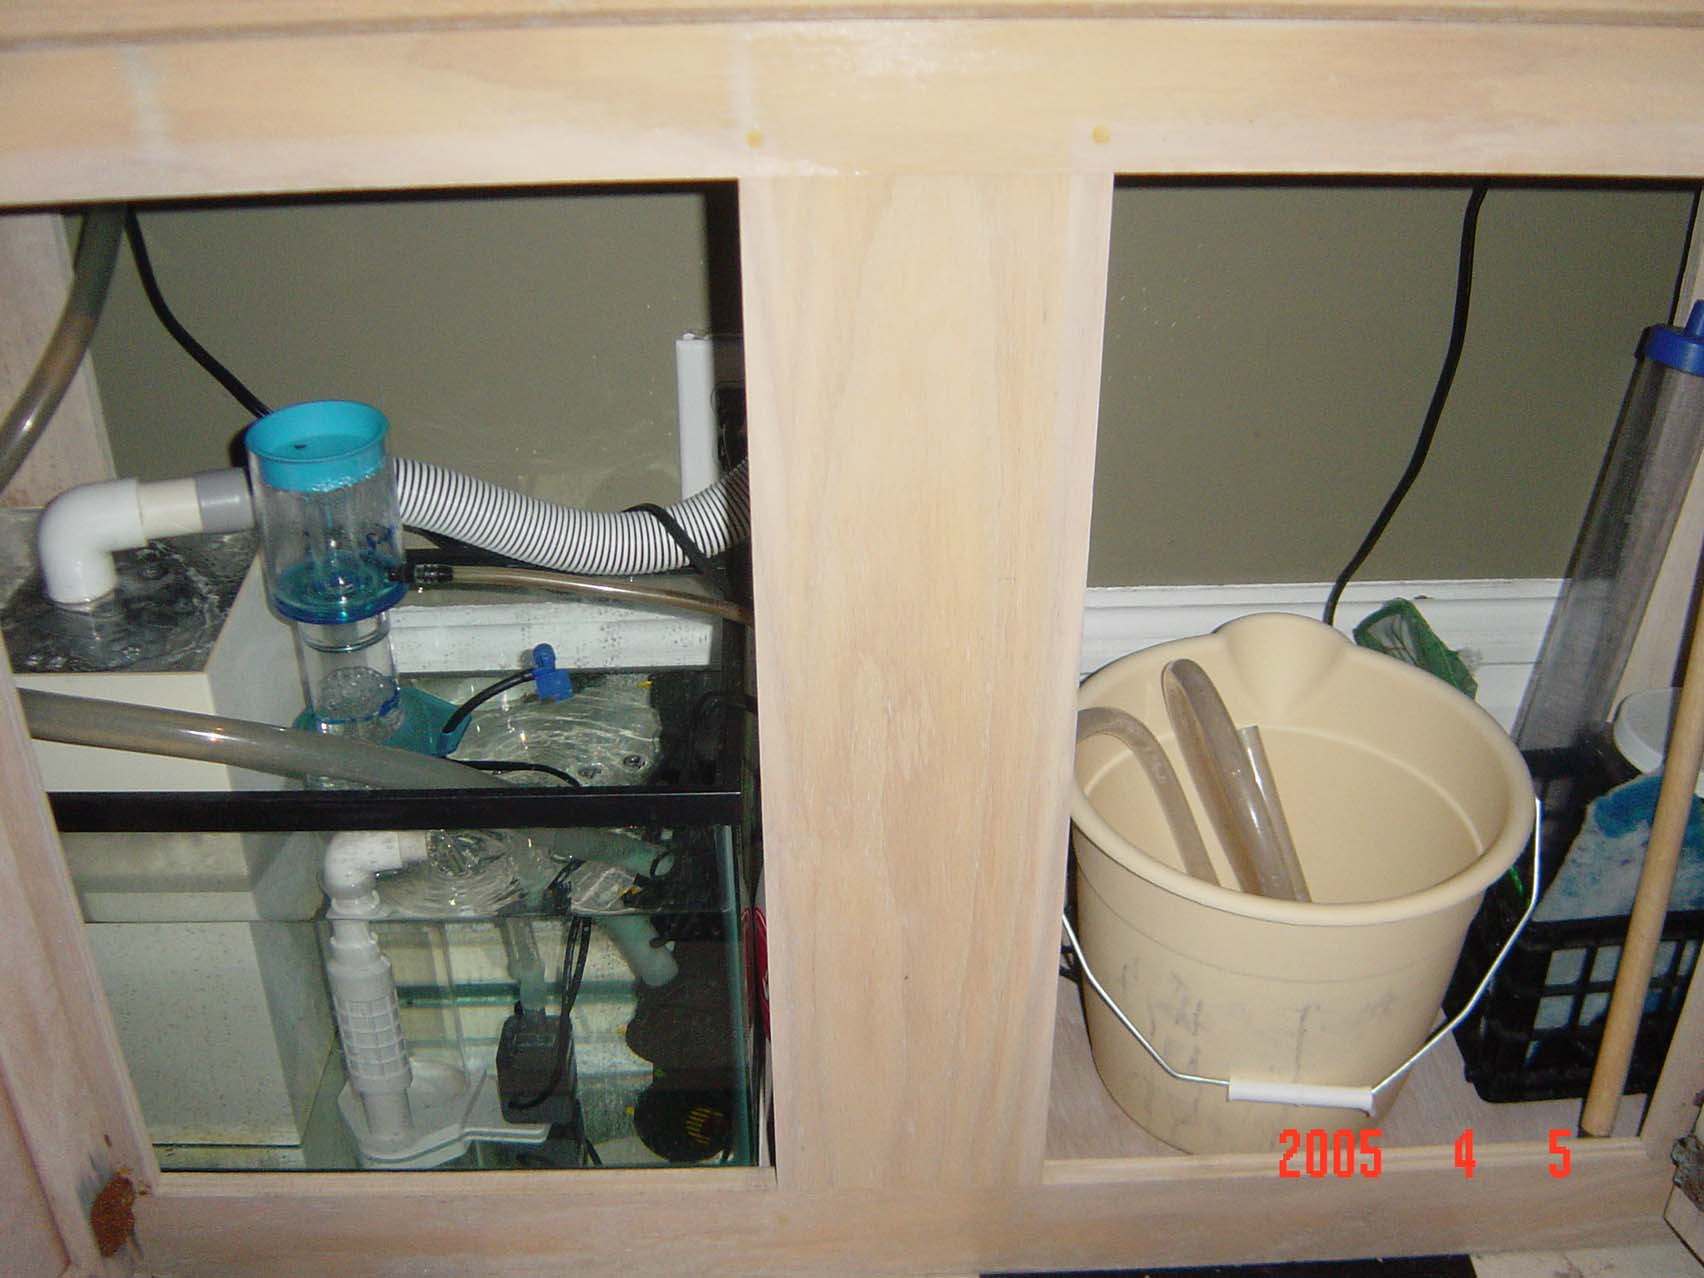 Here is my cannister and protein skimmer in the tank on left, and equipment on the right.